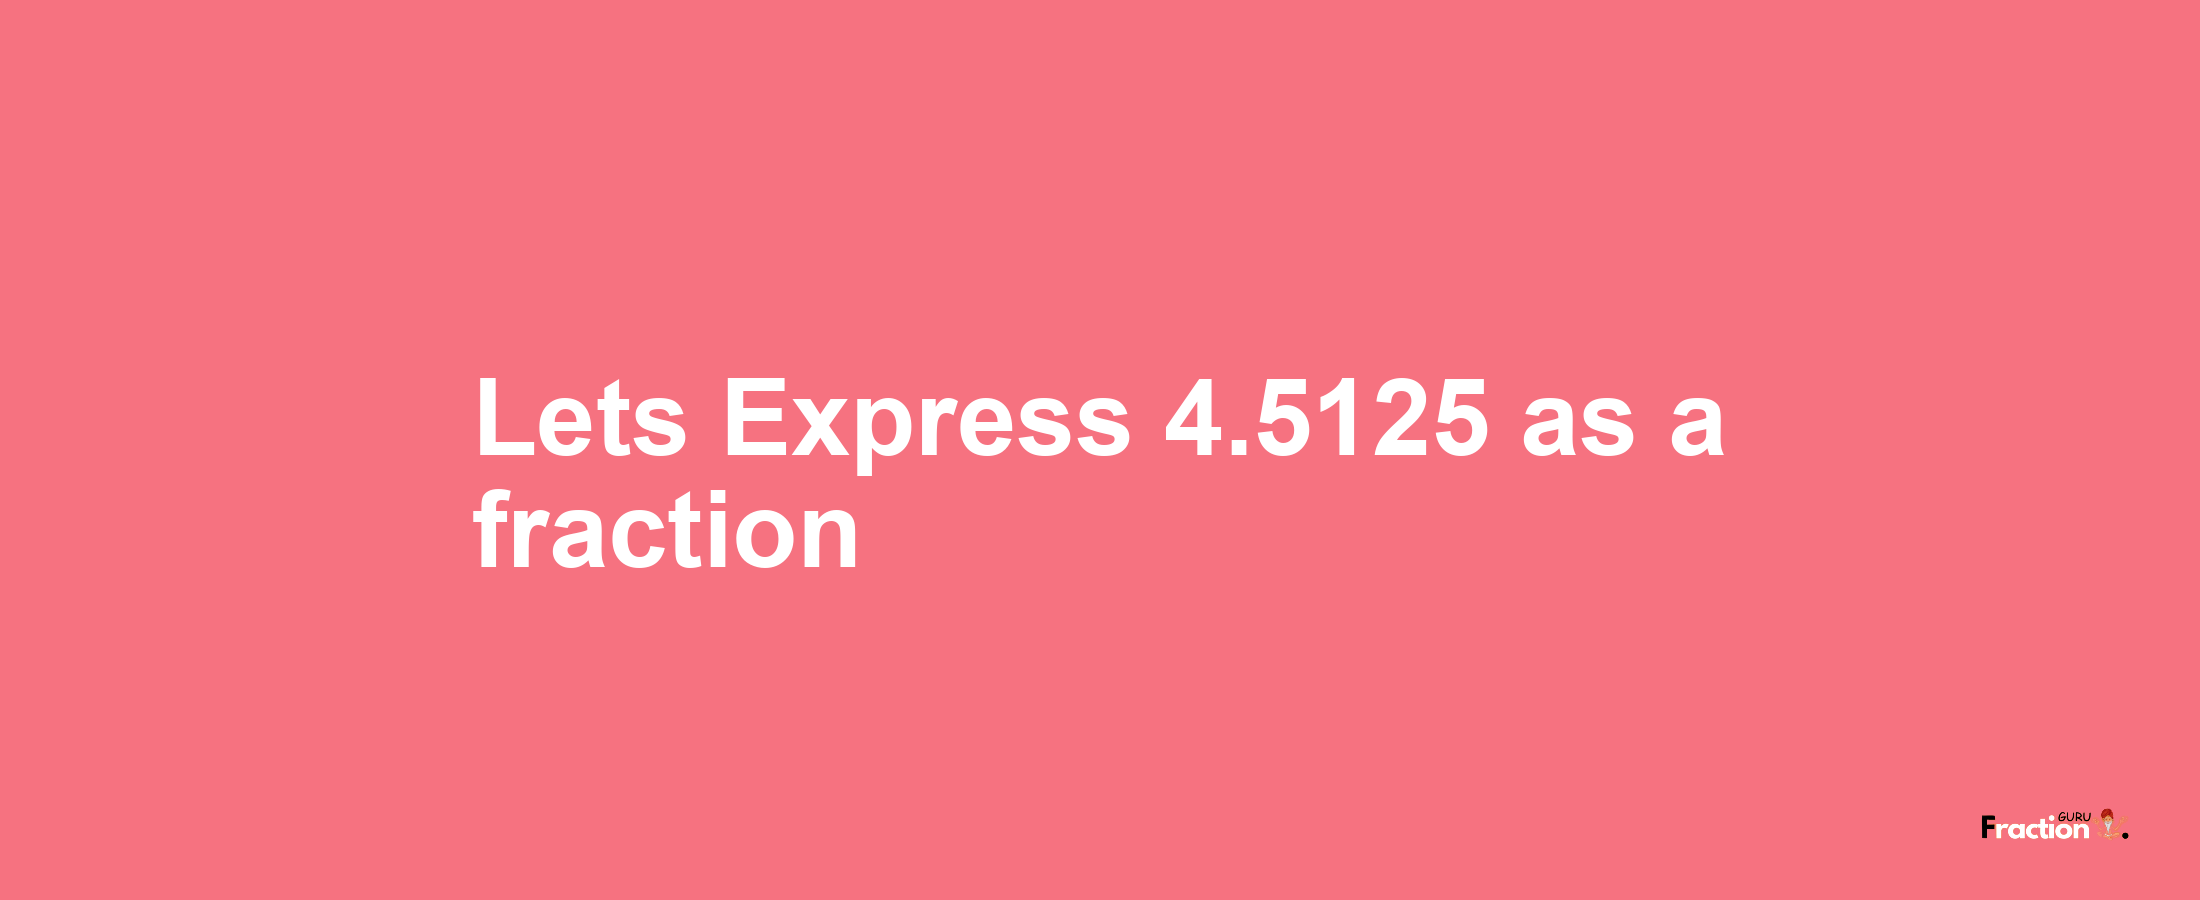 Lets Express 4.5125 as afraction